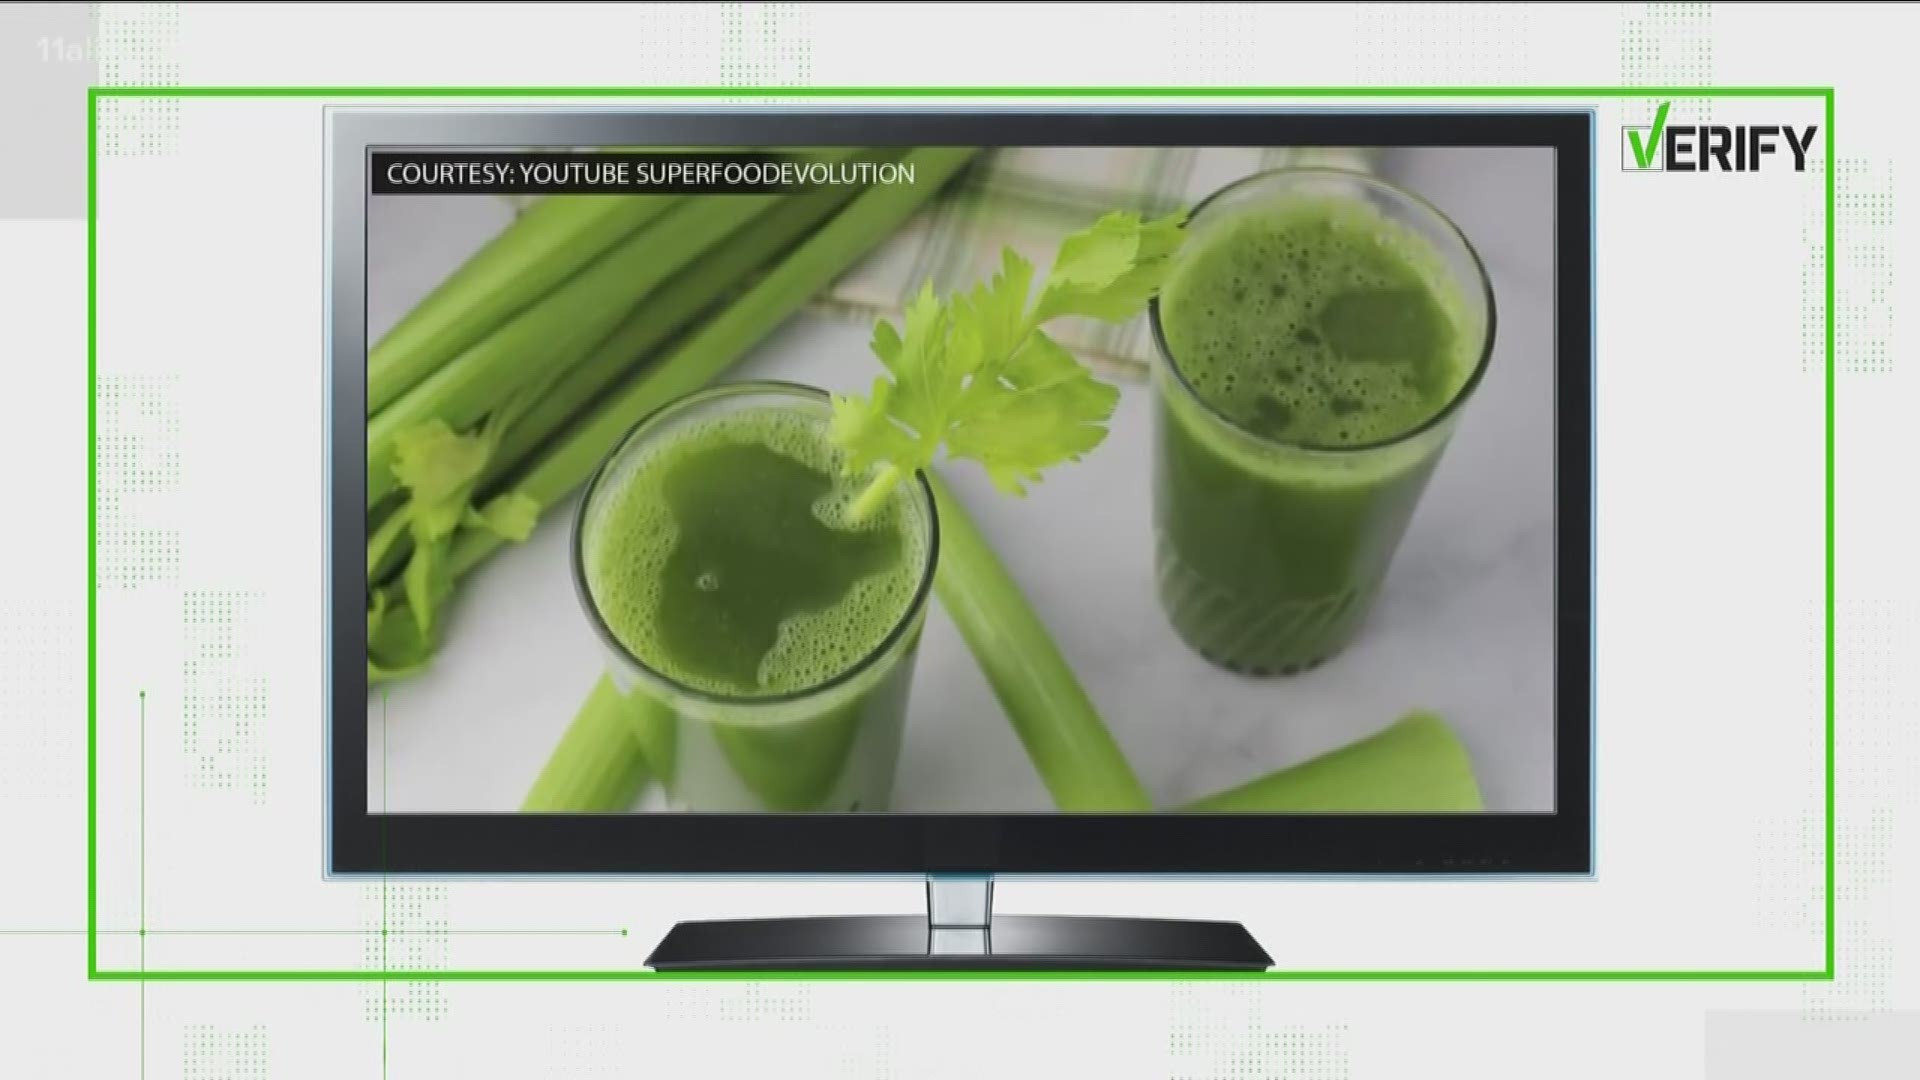 Celery juice is the latest social media health trend, but is it all it's cracked up to be. Liza Lucas verifies.